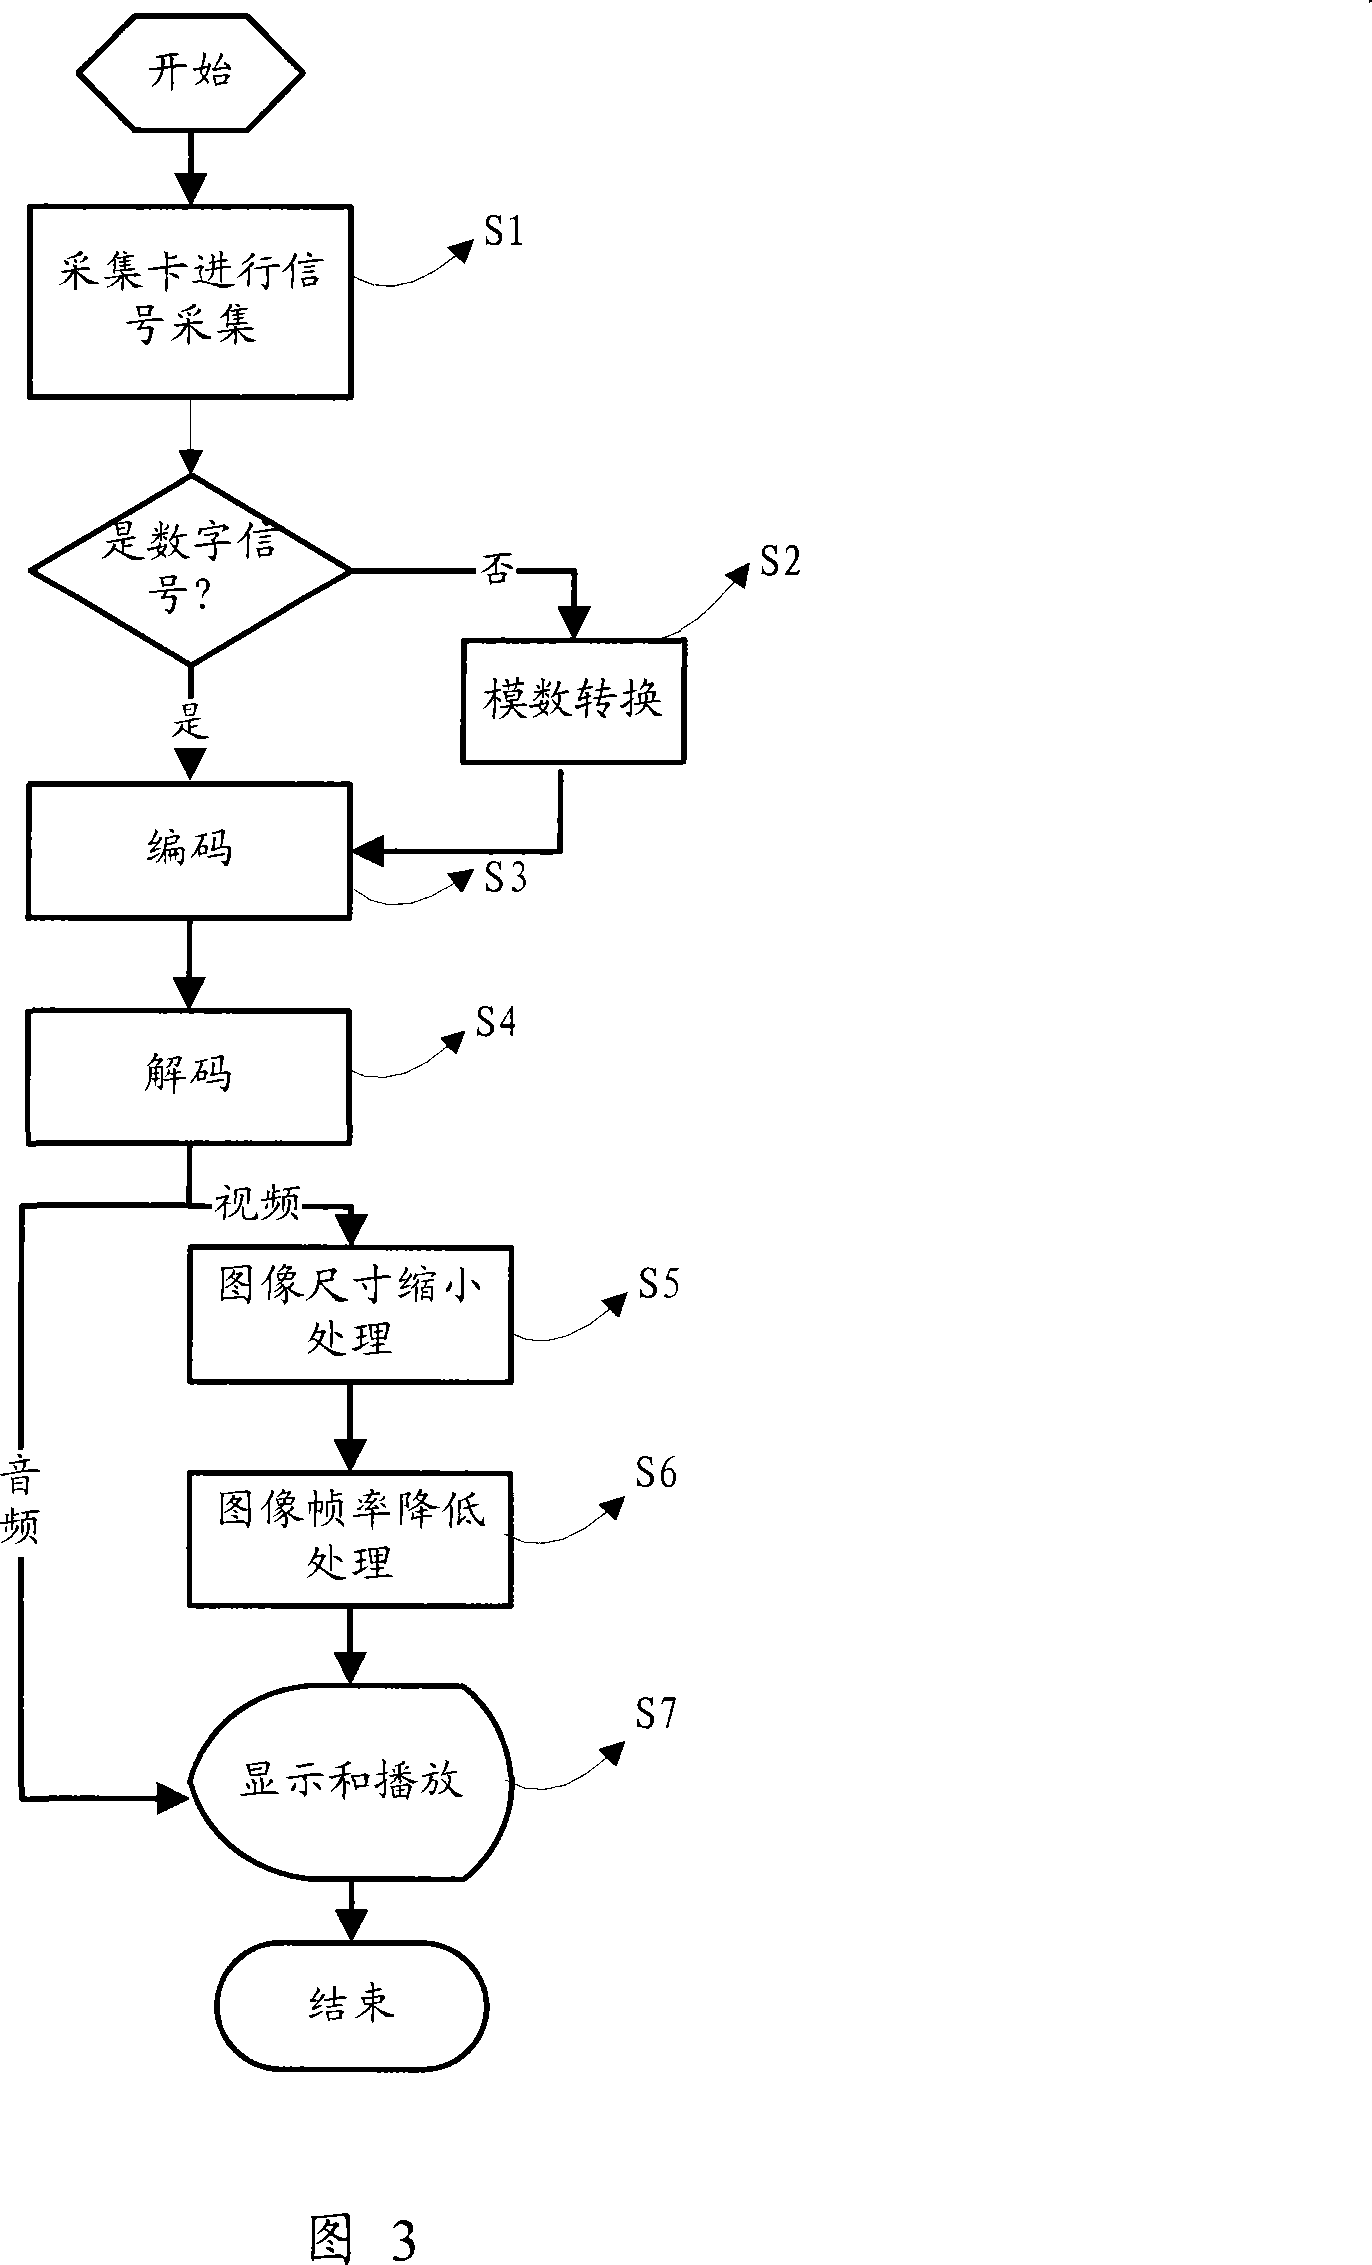 A method for real time monitoring signals of encoding device